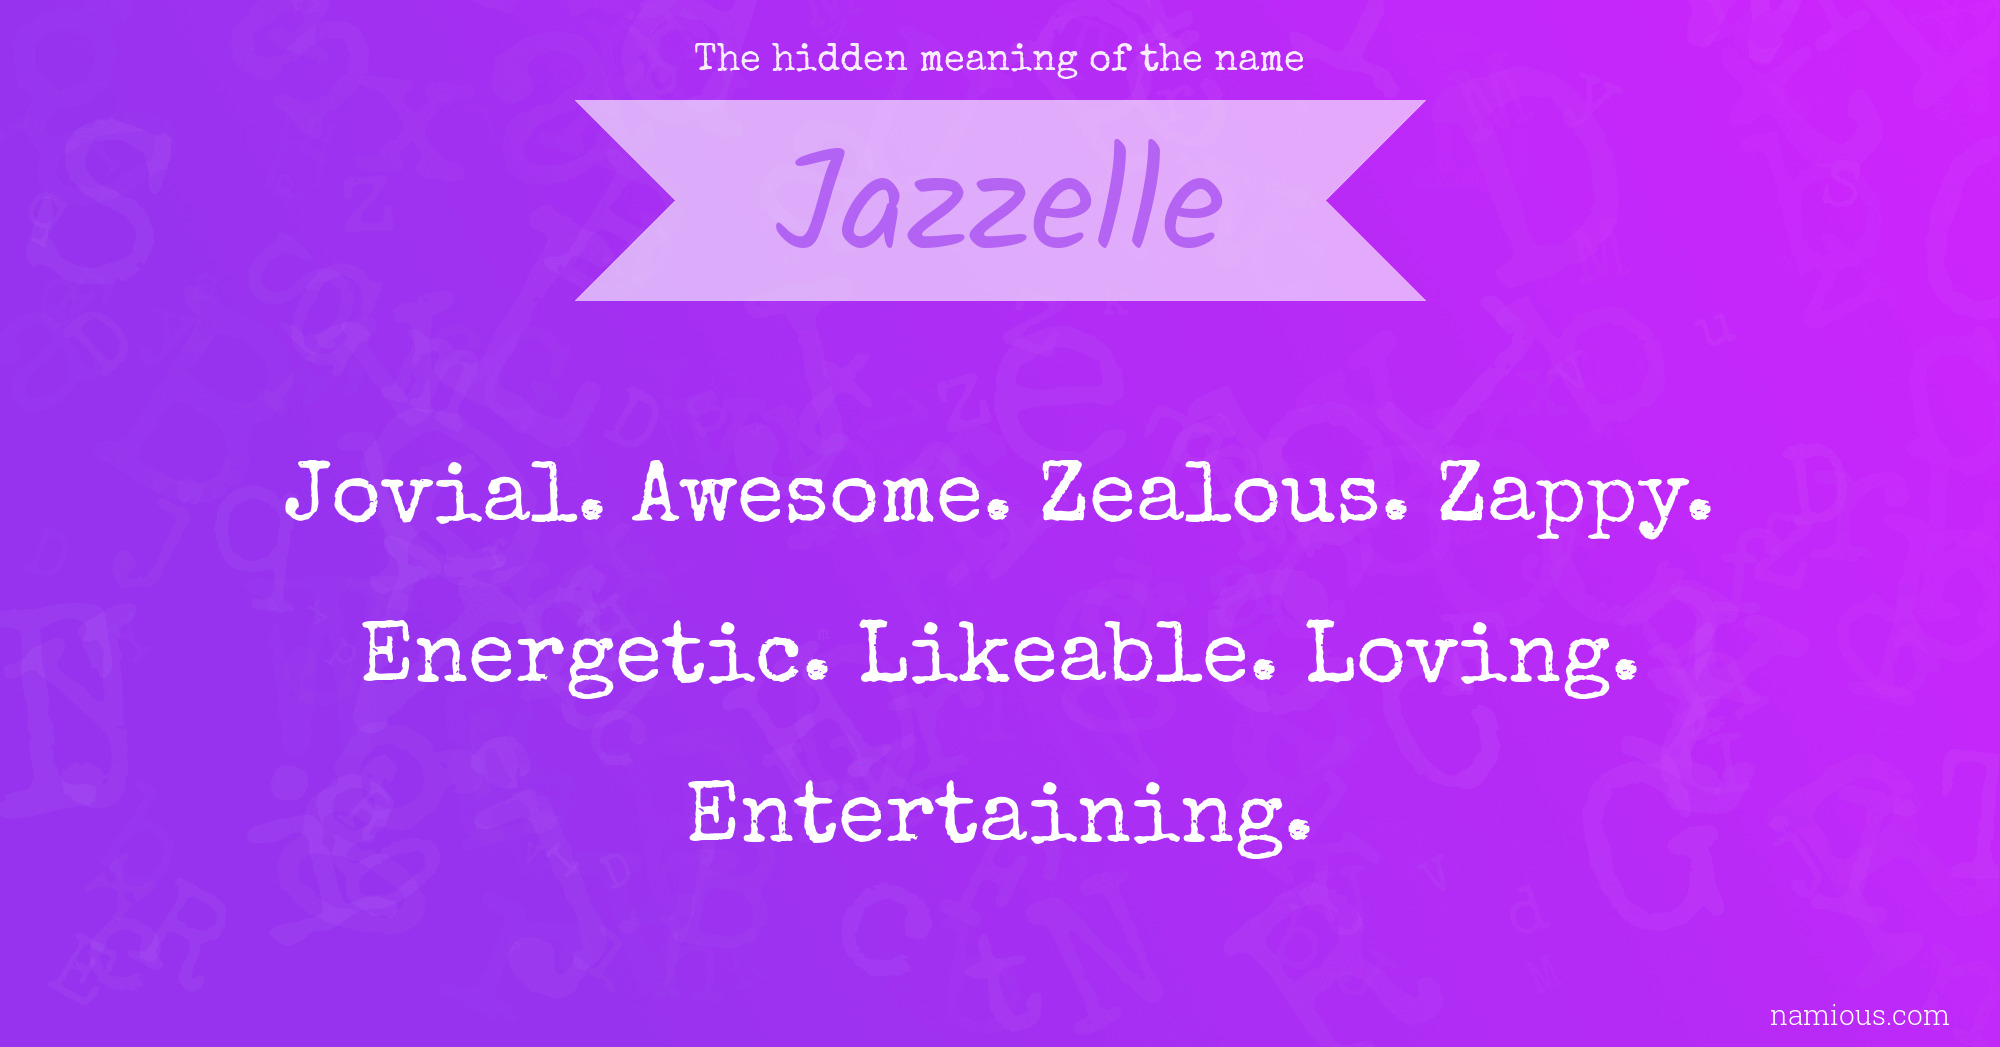 The hidden meaning of the name Jazzelle